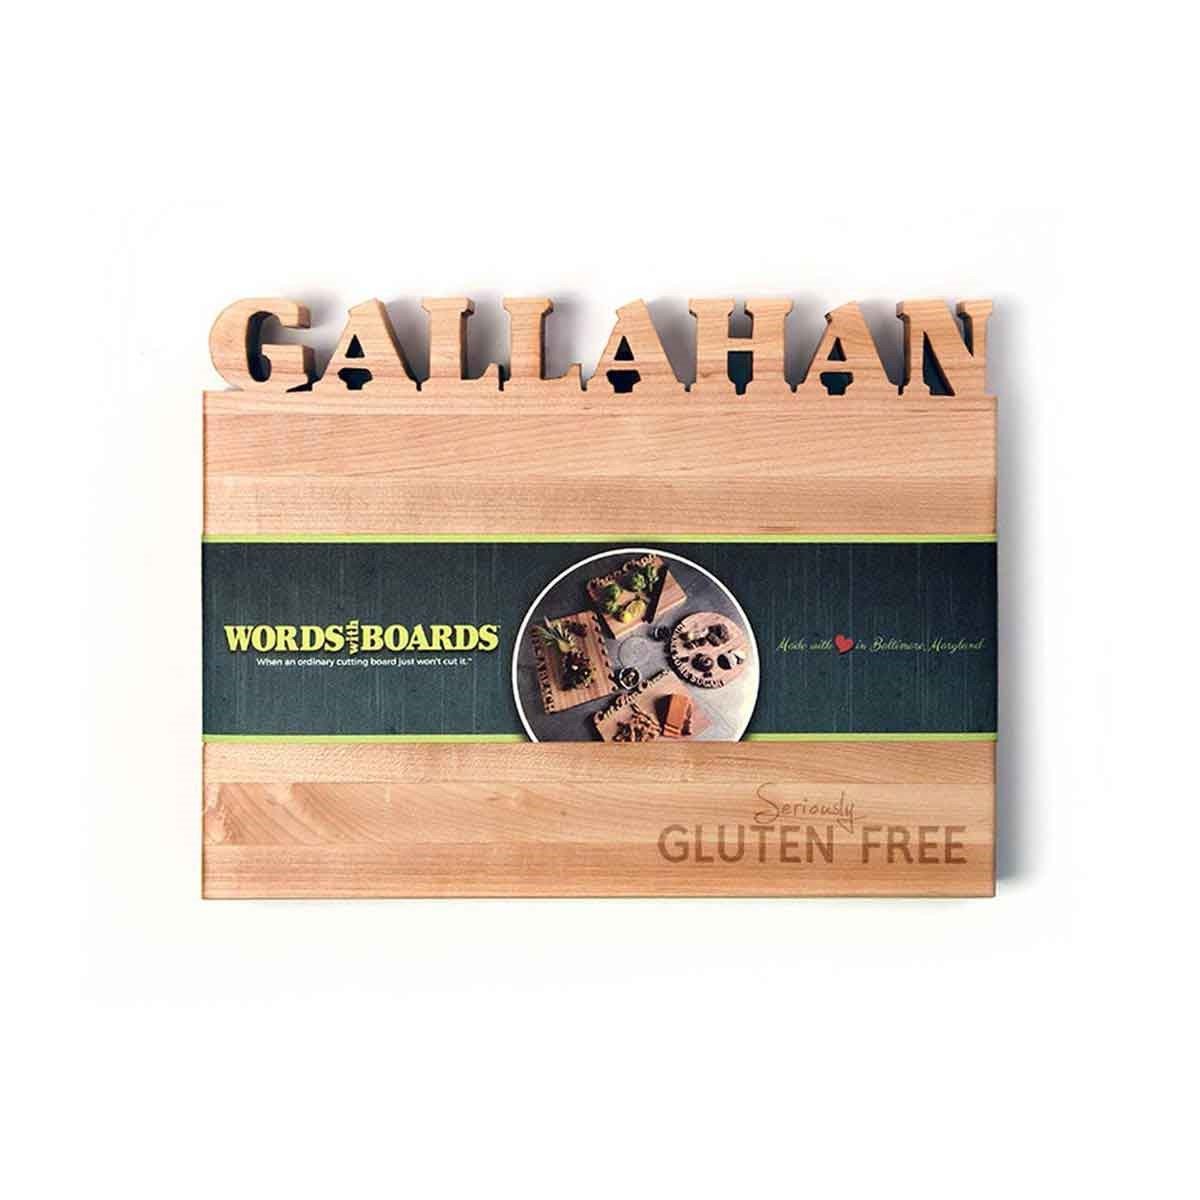 Gluten free gifts, wood cutting board that says Seriously gluten free